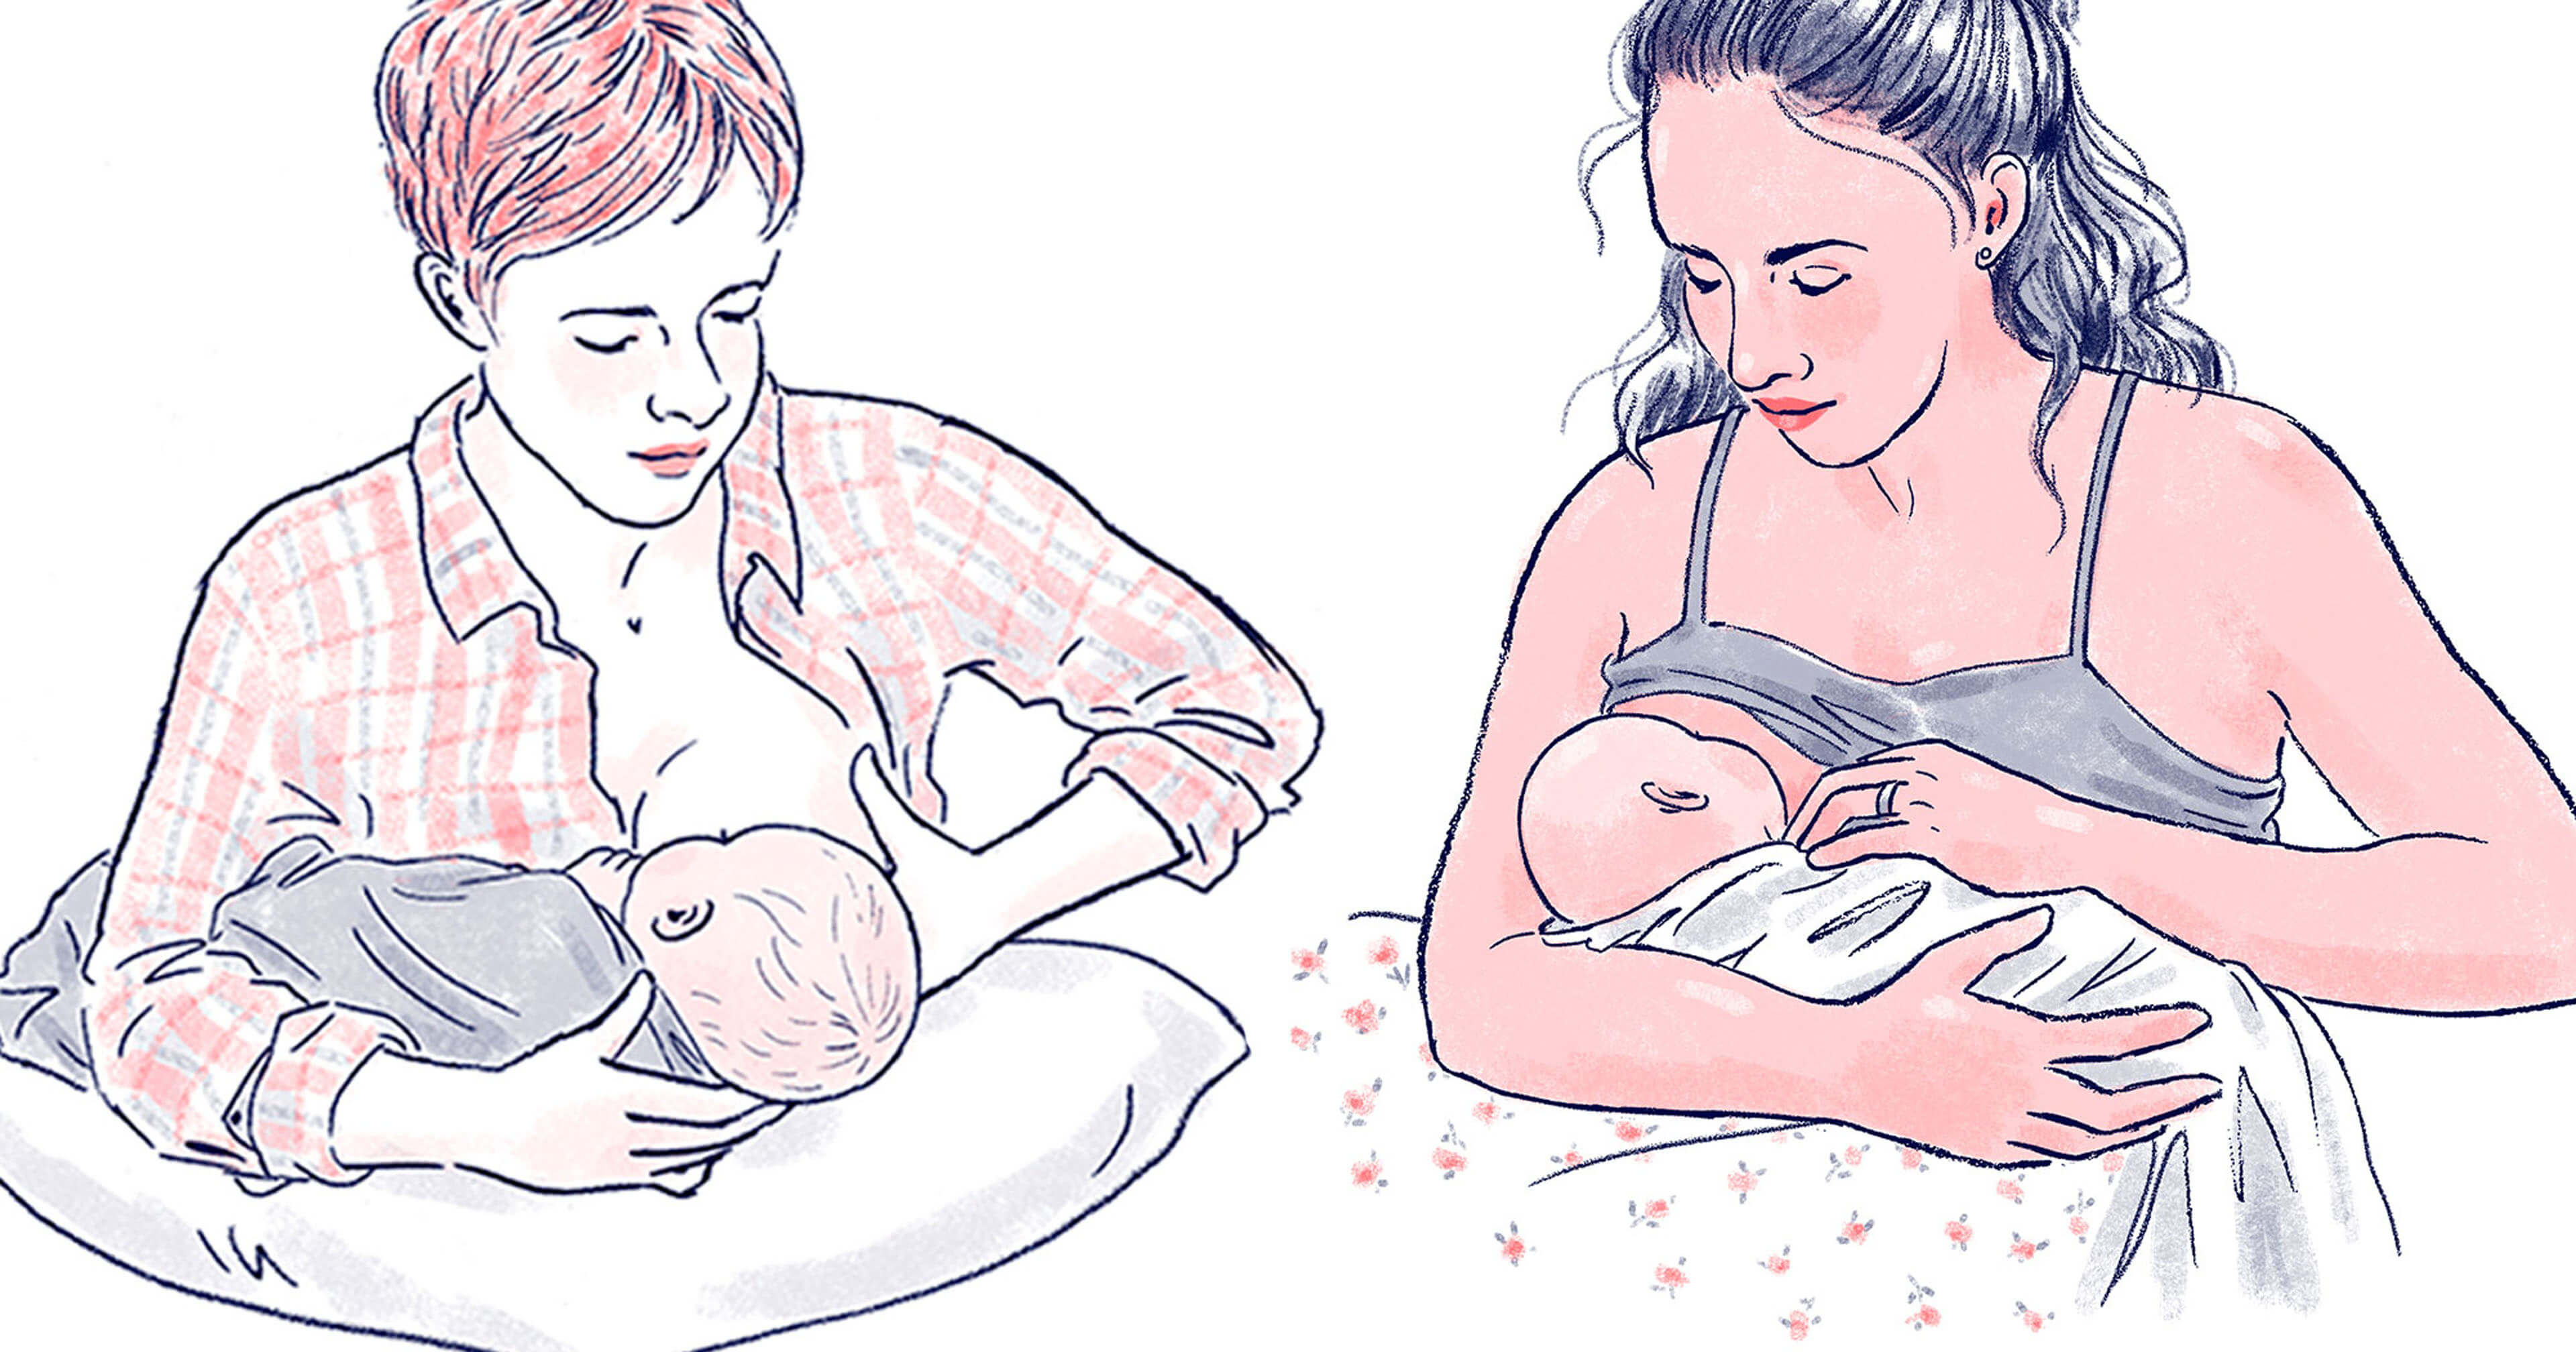 Breastfeeding positions: which are best for you?, Baby & toddler, Feeding  articles & support